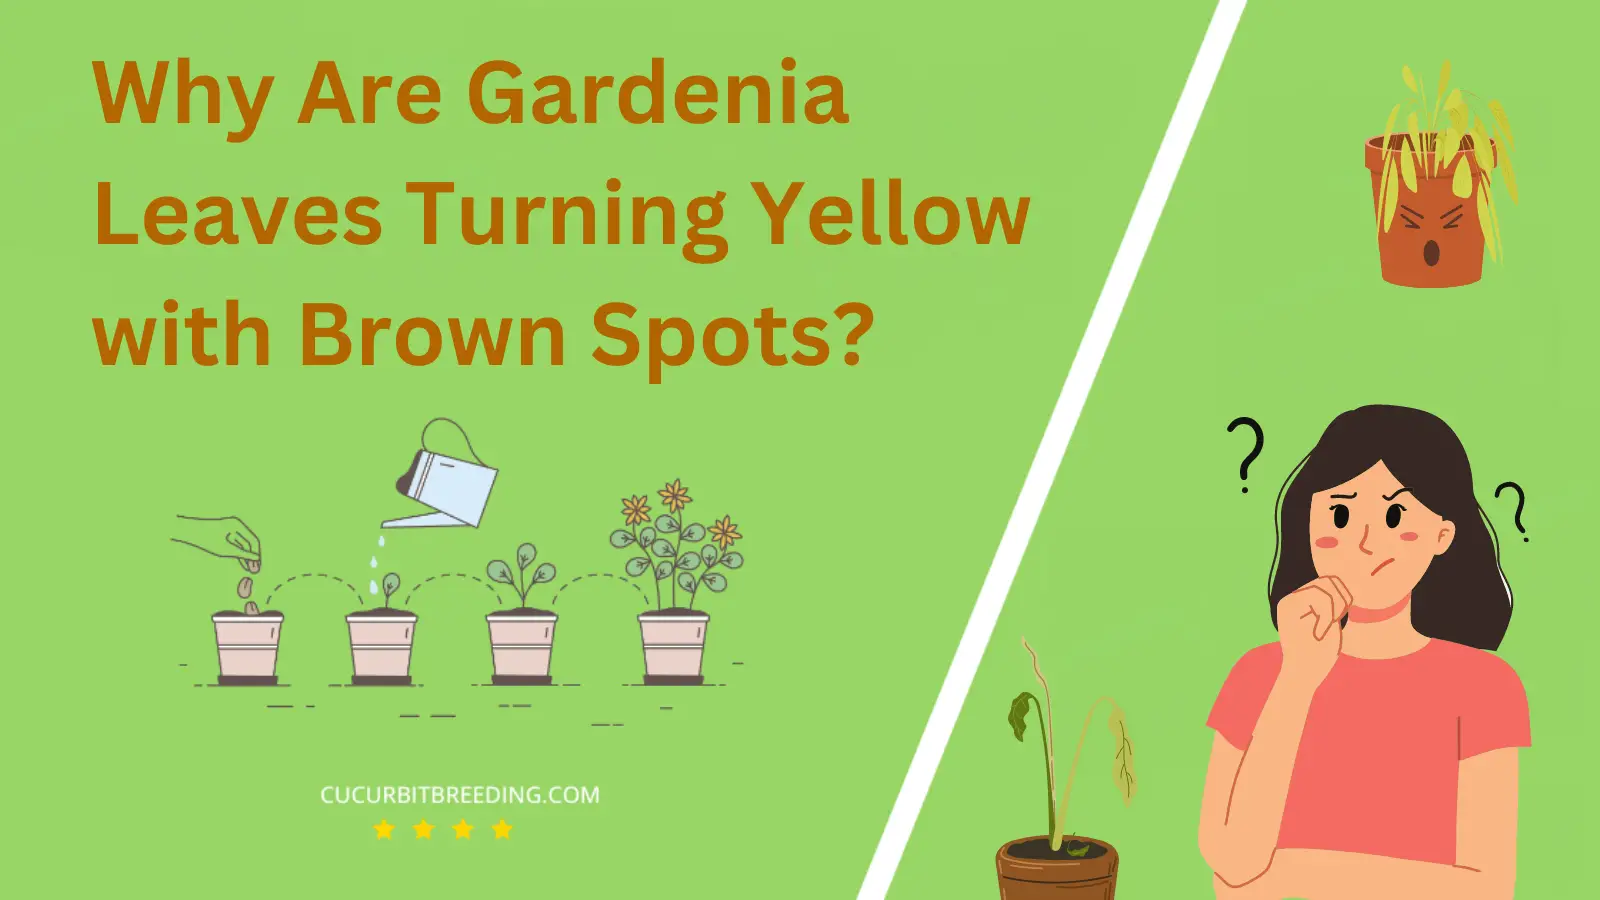 Why Are Gardenia Leaves Turning Yellow with Brown Spots